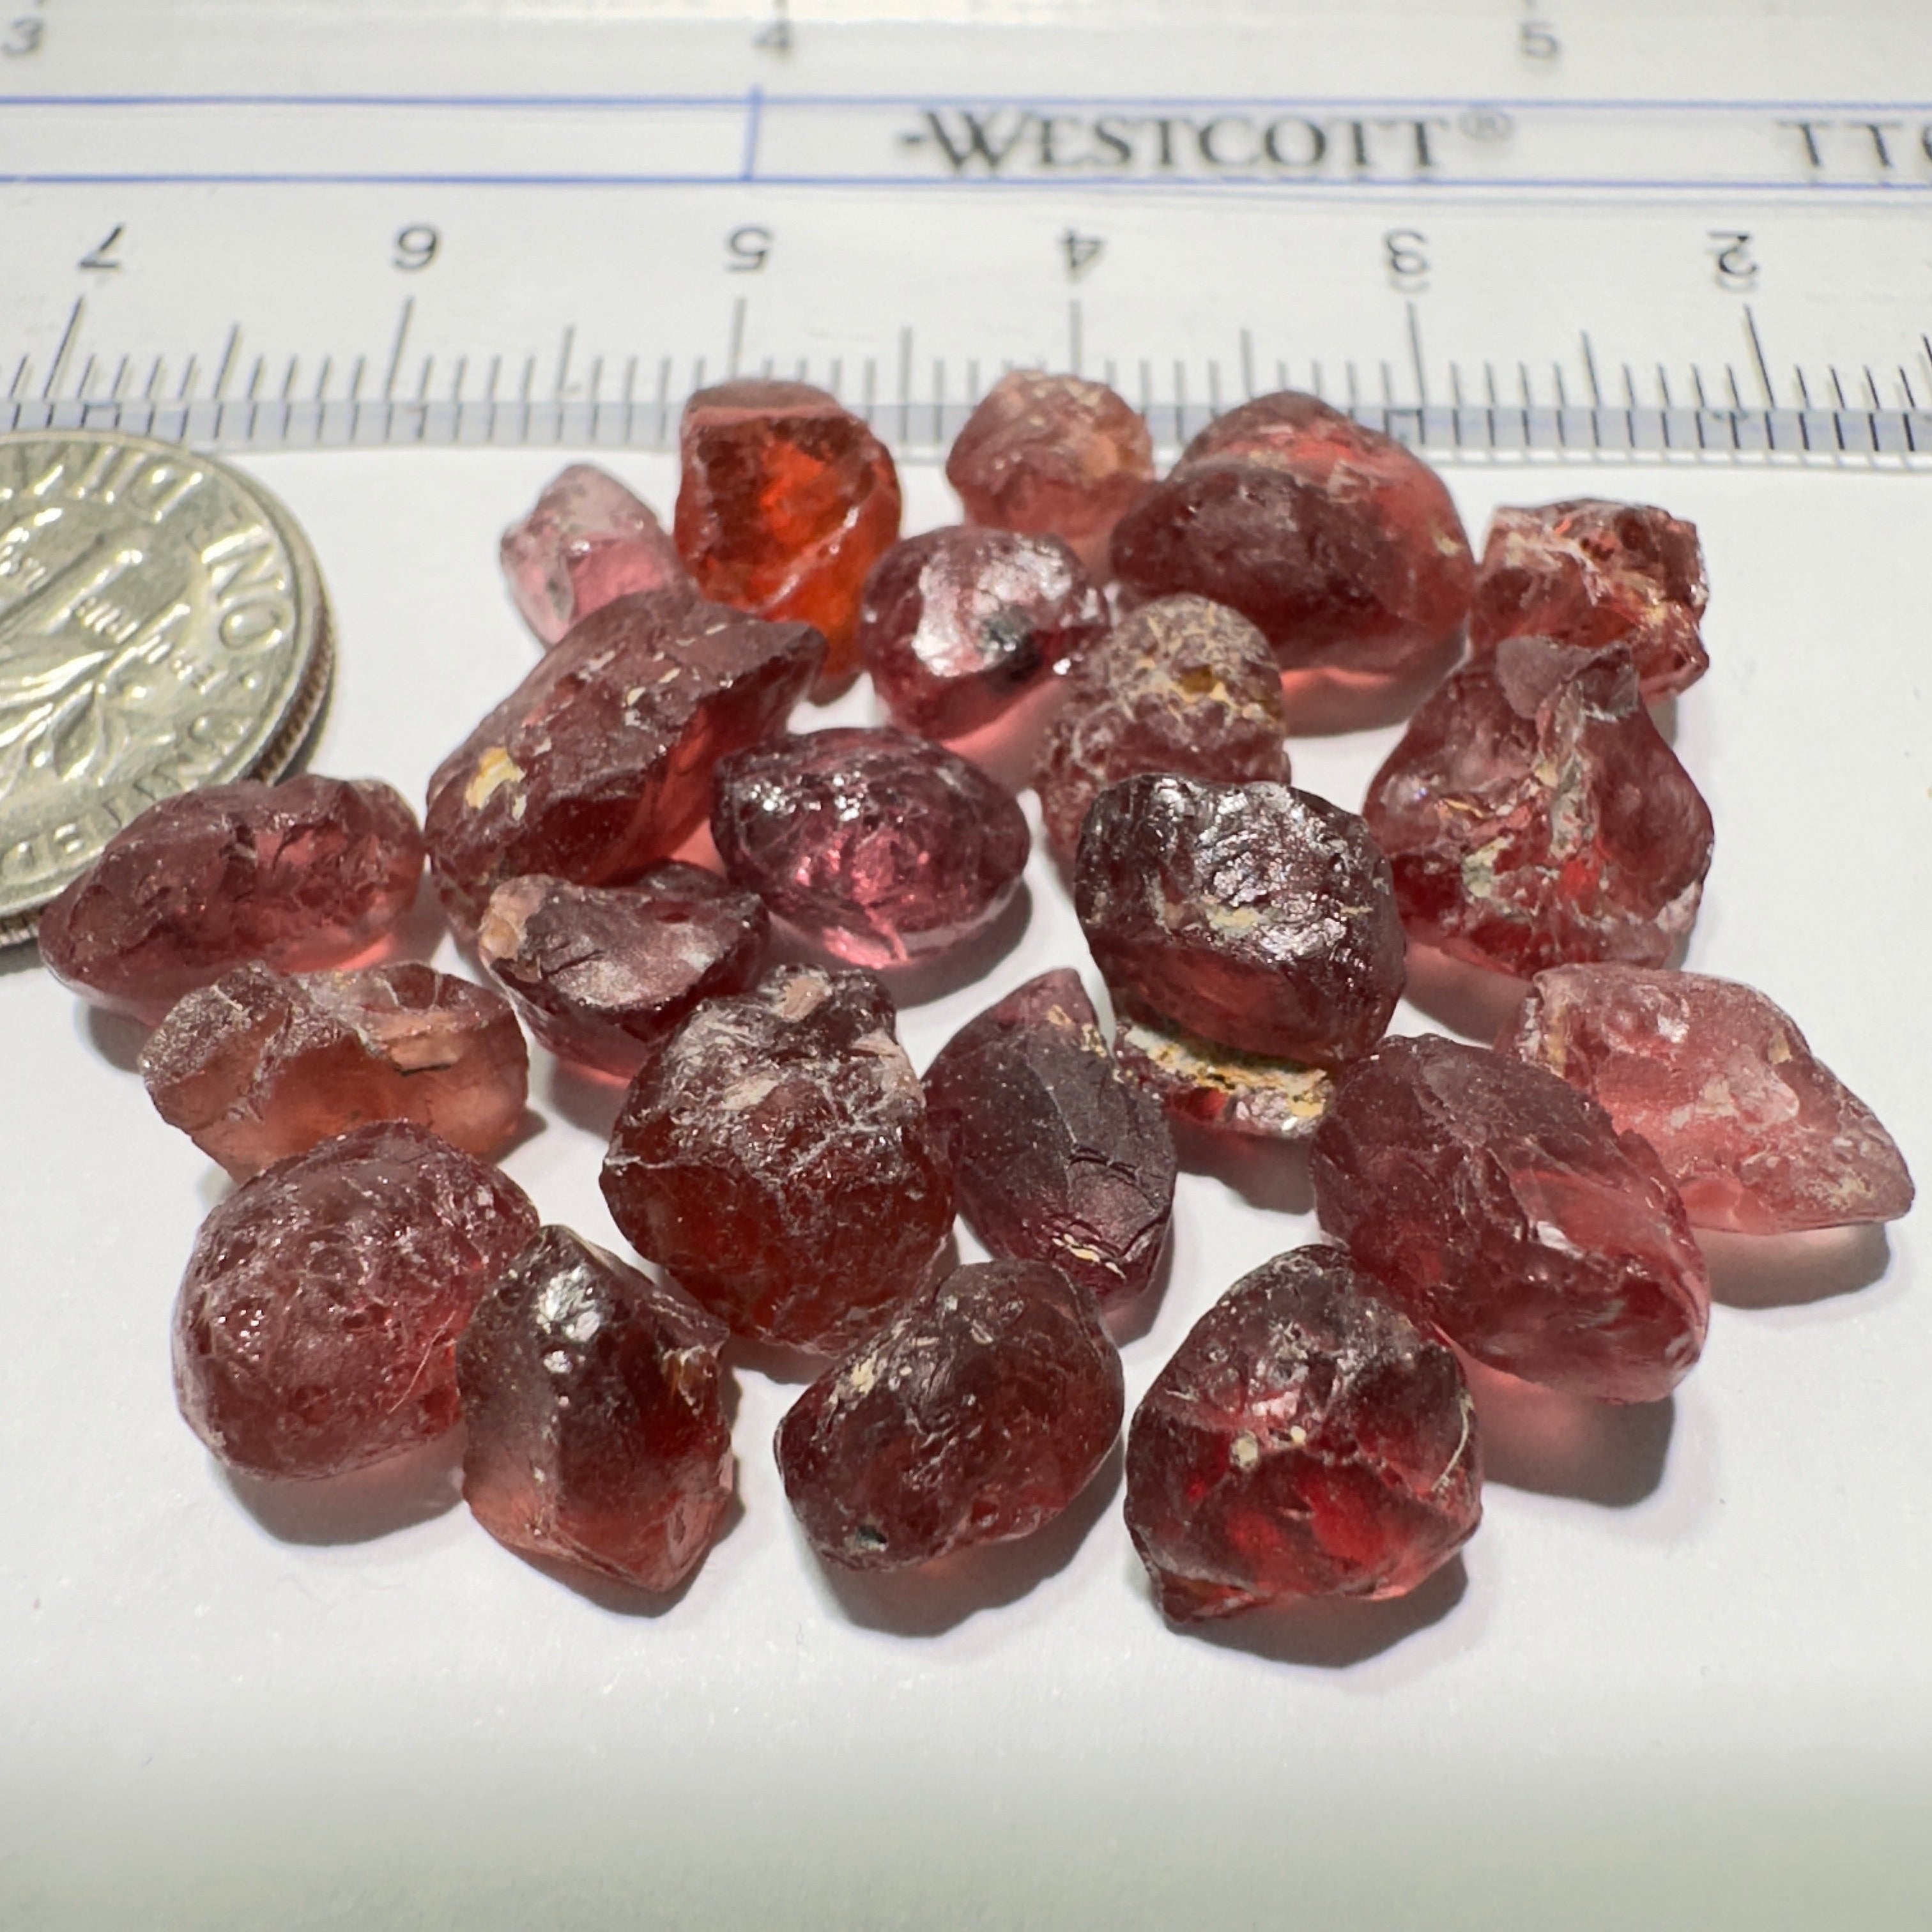 57.95ct Champagne Garnet Lot, Tanzania. 1.08ct-4.78ct. Included, Untreated Unheated